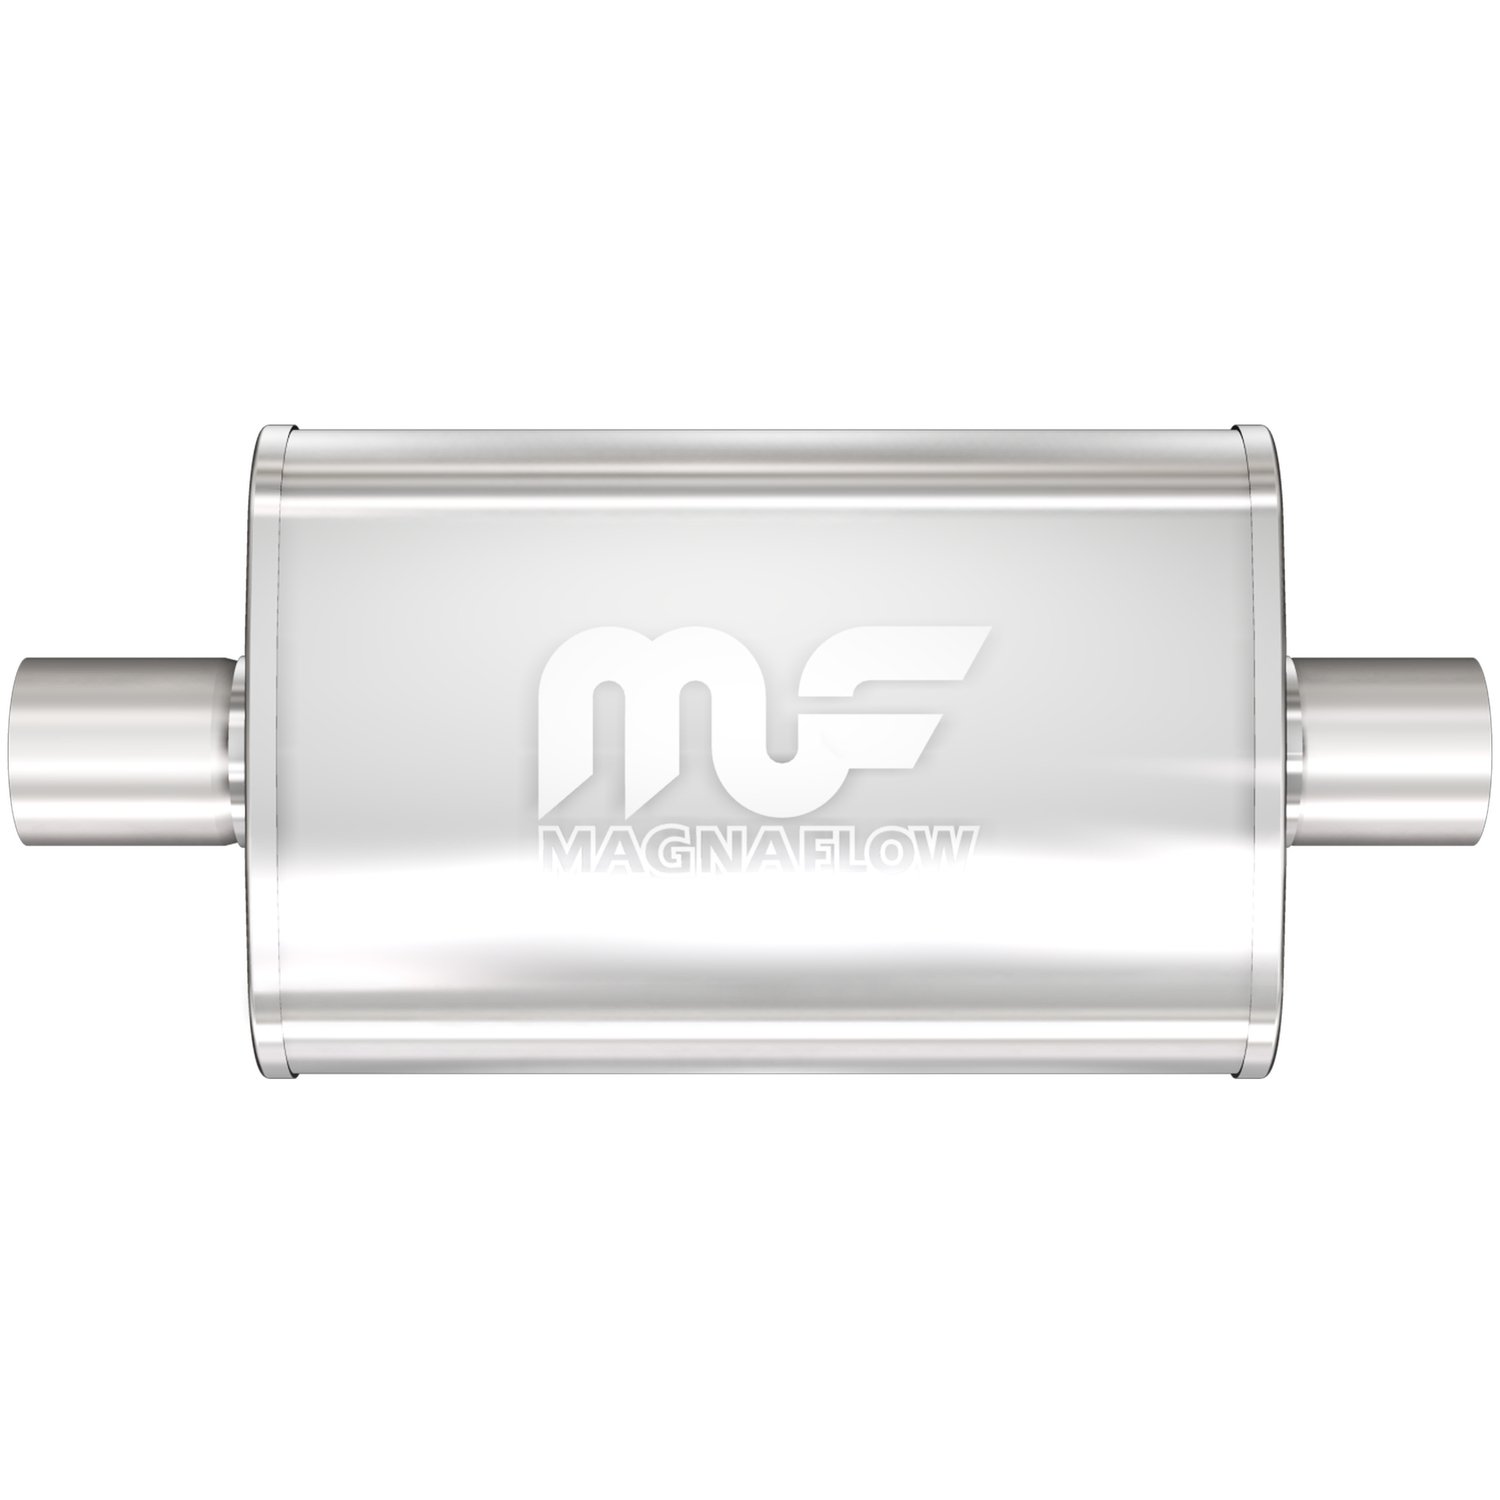 4" x 9" Oval Muffler Center In/Center Out: 2"/2" Body Length: 14" Overall Length: 20" Core Size: 2.25" Satin Finish